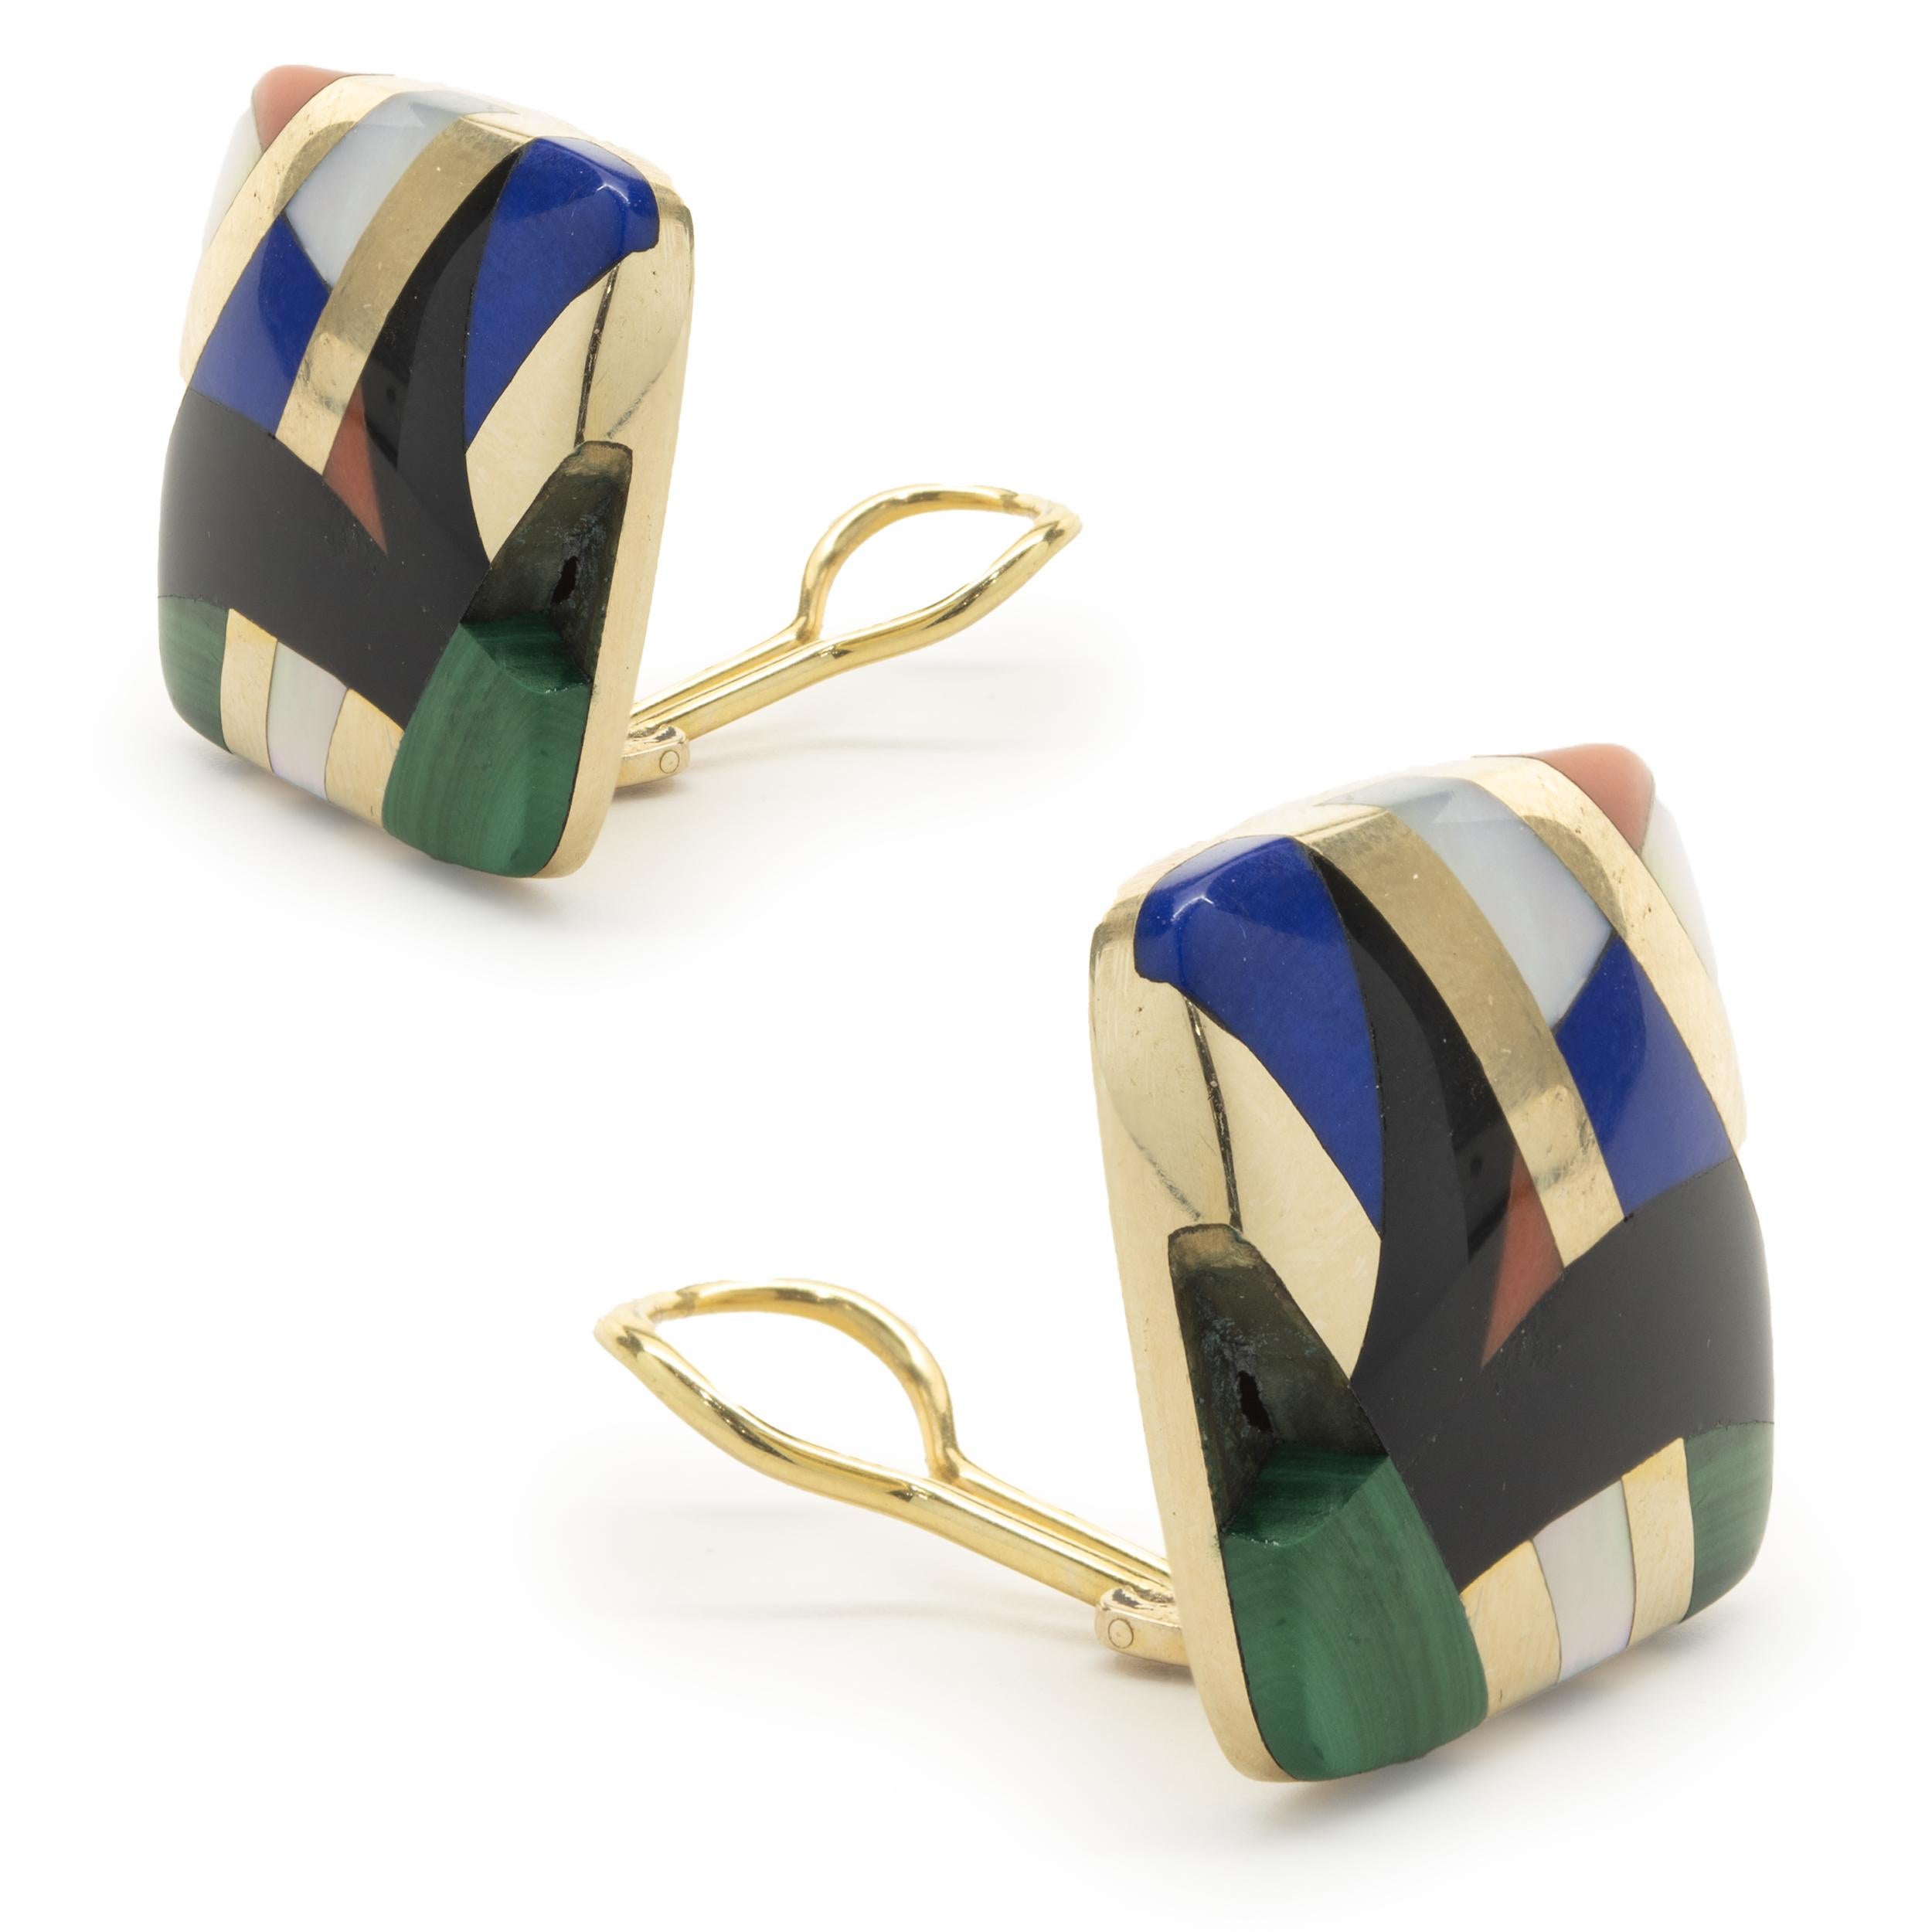 Designer: Grossbardt
Material: 14K yellow gold
Weight: 17.10 grams
Dimensions: earrings measures 23.90mm wide